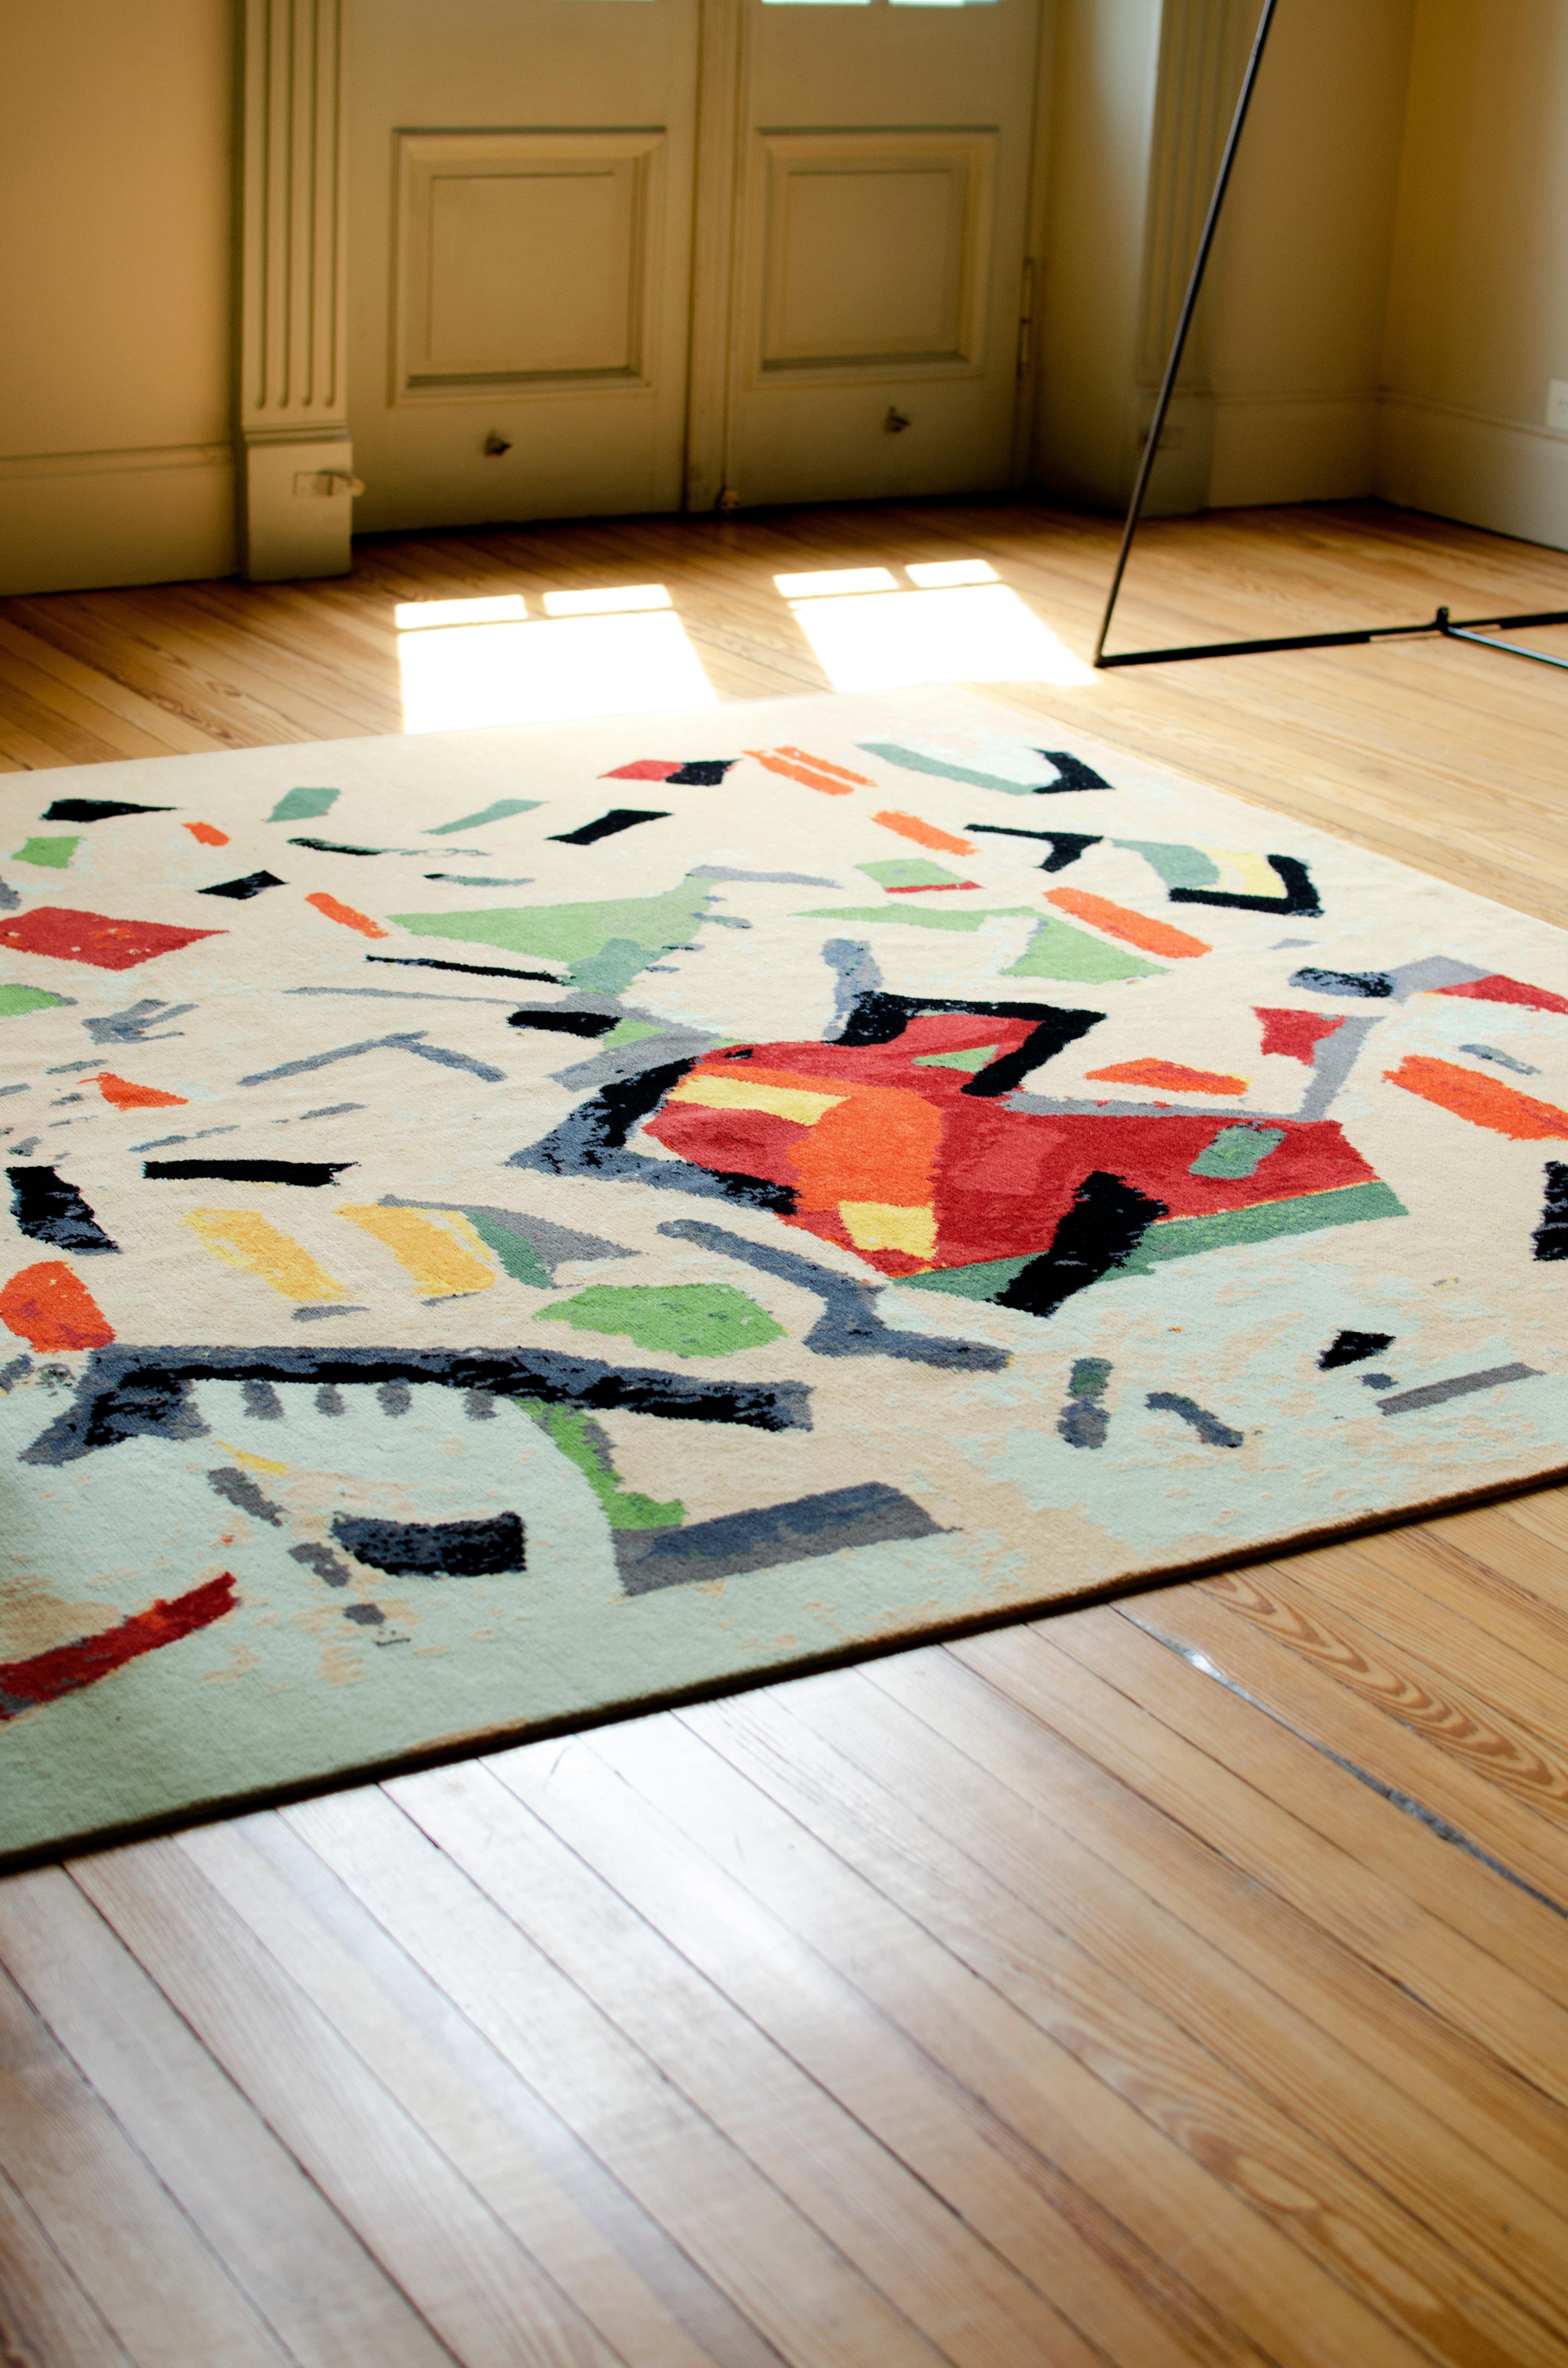 Adapted from the original artwork by Juan Del Prete, Untitled, 1978. 

LALANA RUGS is an applied arts initiative born from the desire to combine proposals by contemporary artists with traditional local techniques and noble materials. The three “As”